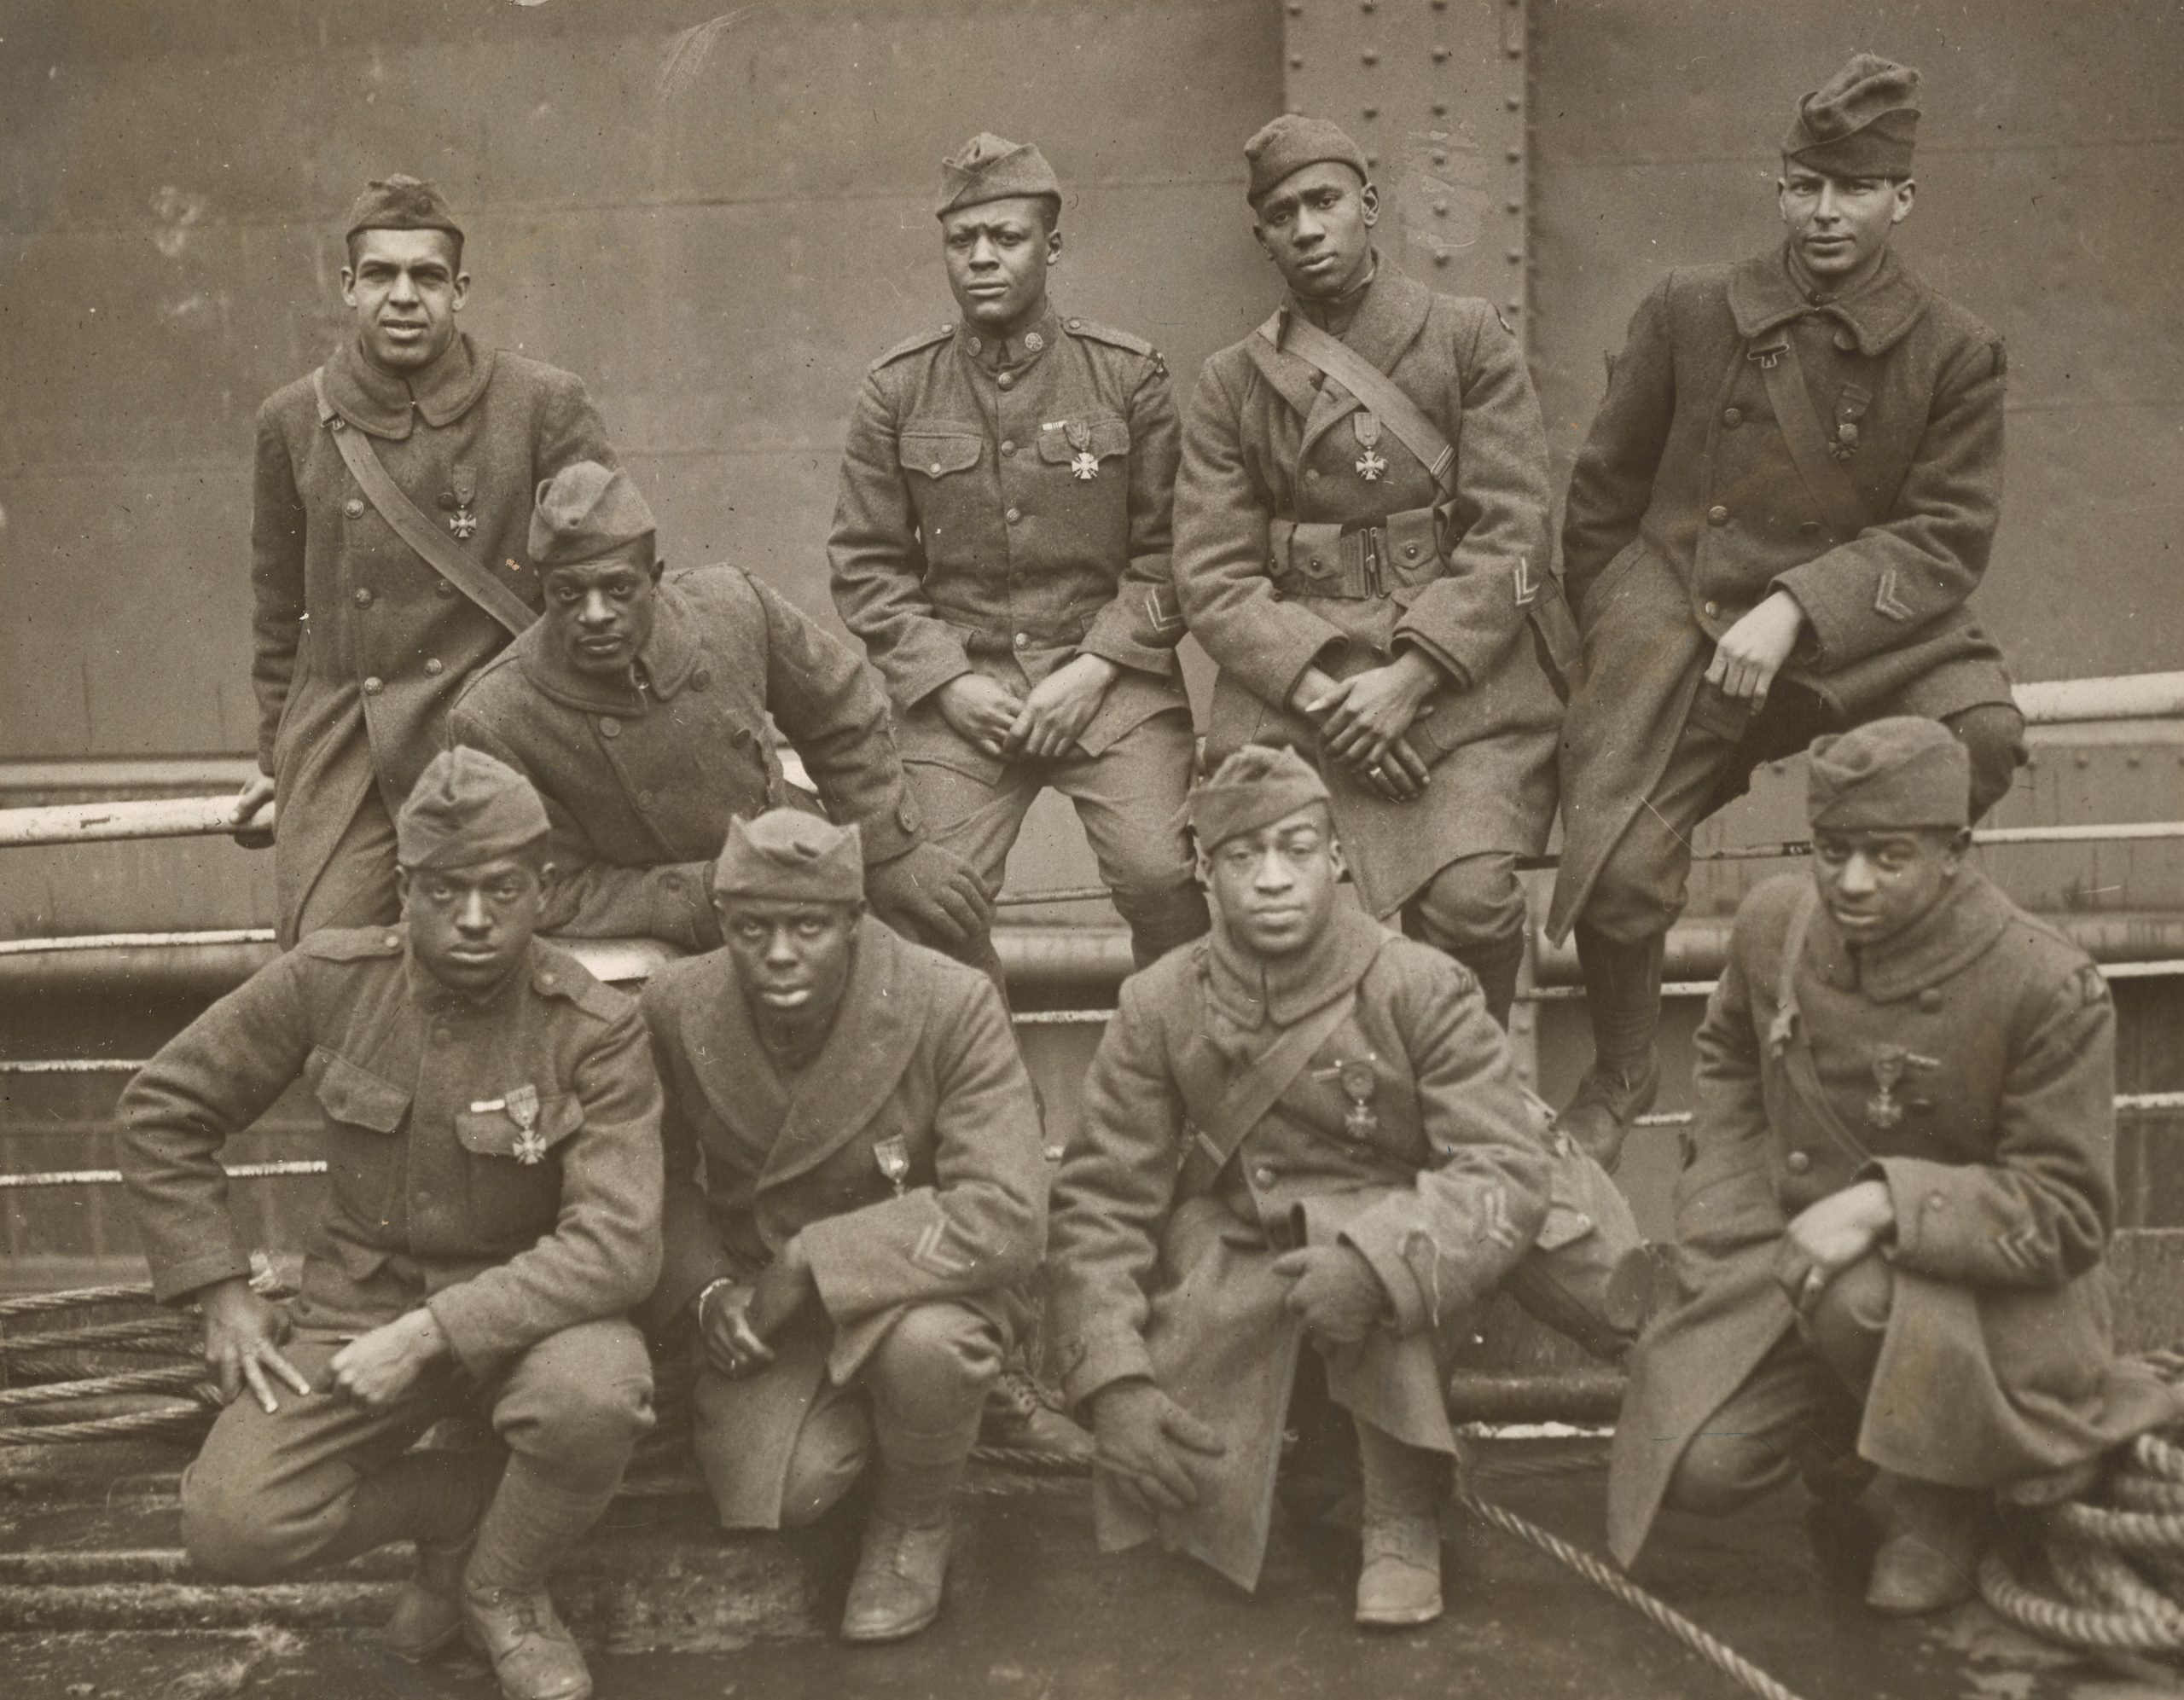 9 Black American Soldiers pose on in uniform. All have the Croix de Guerre medal pinned to their left breast pocket.